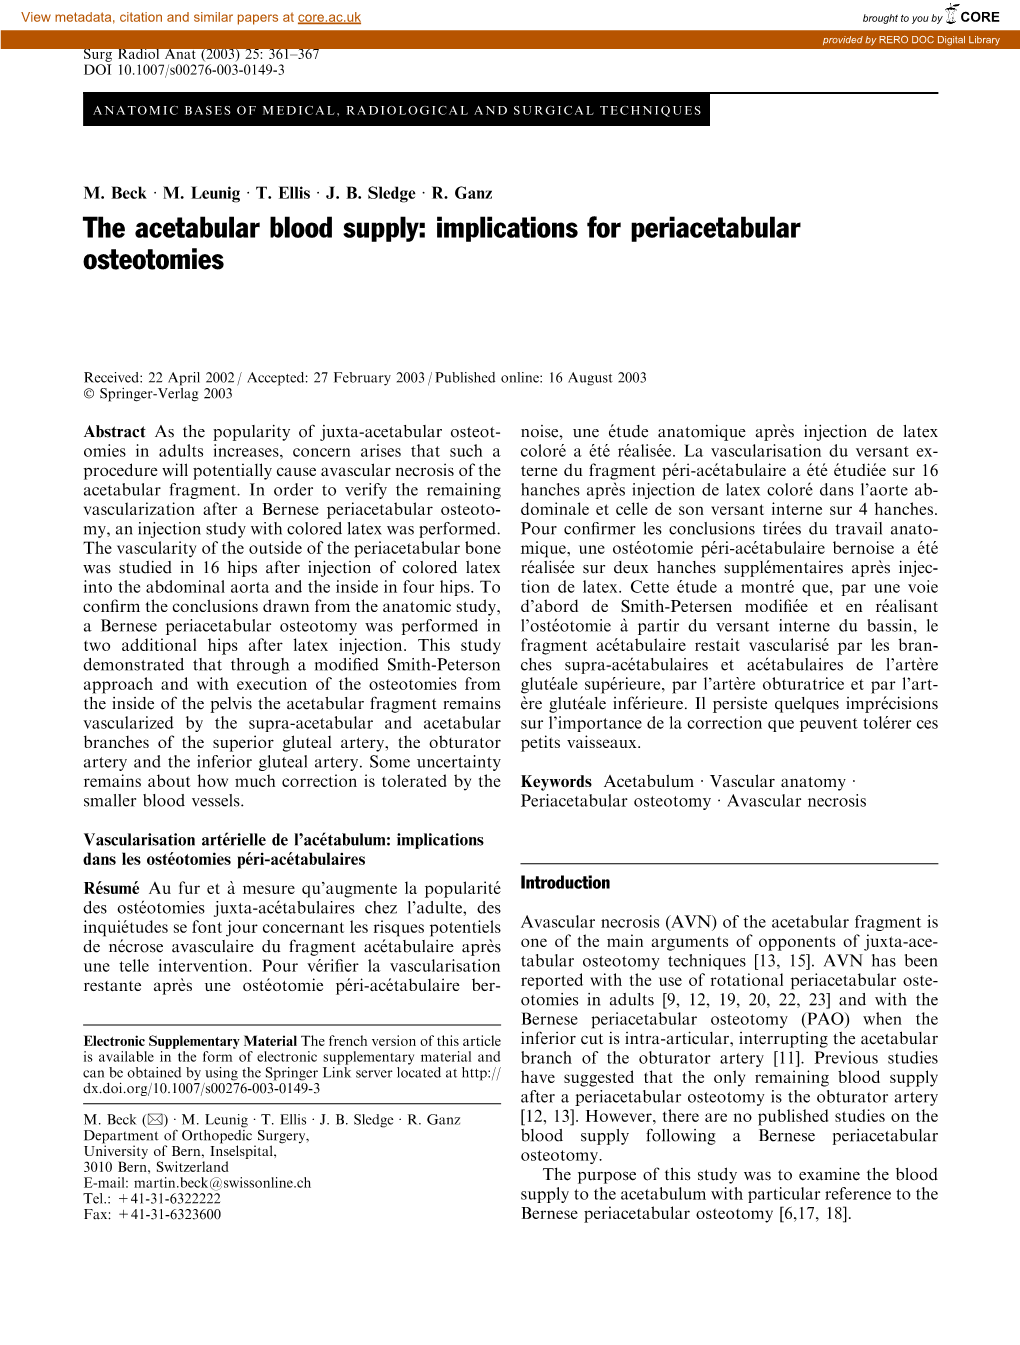 The Acetabular Blood Supply: Implications for Periacetabular Osteotomies